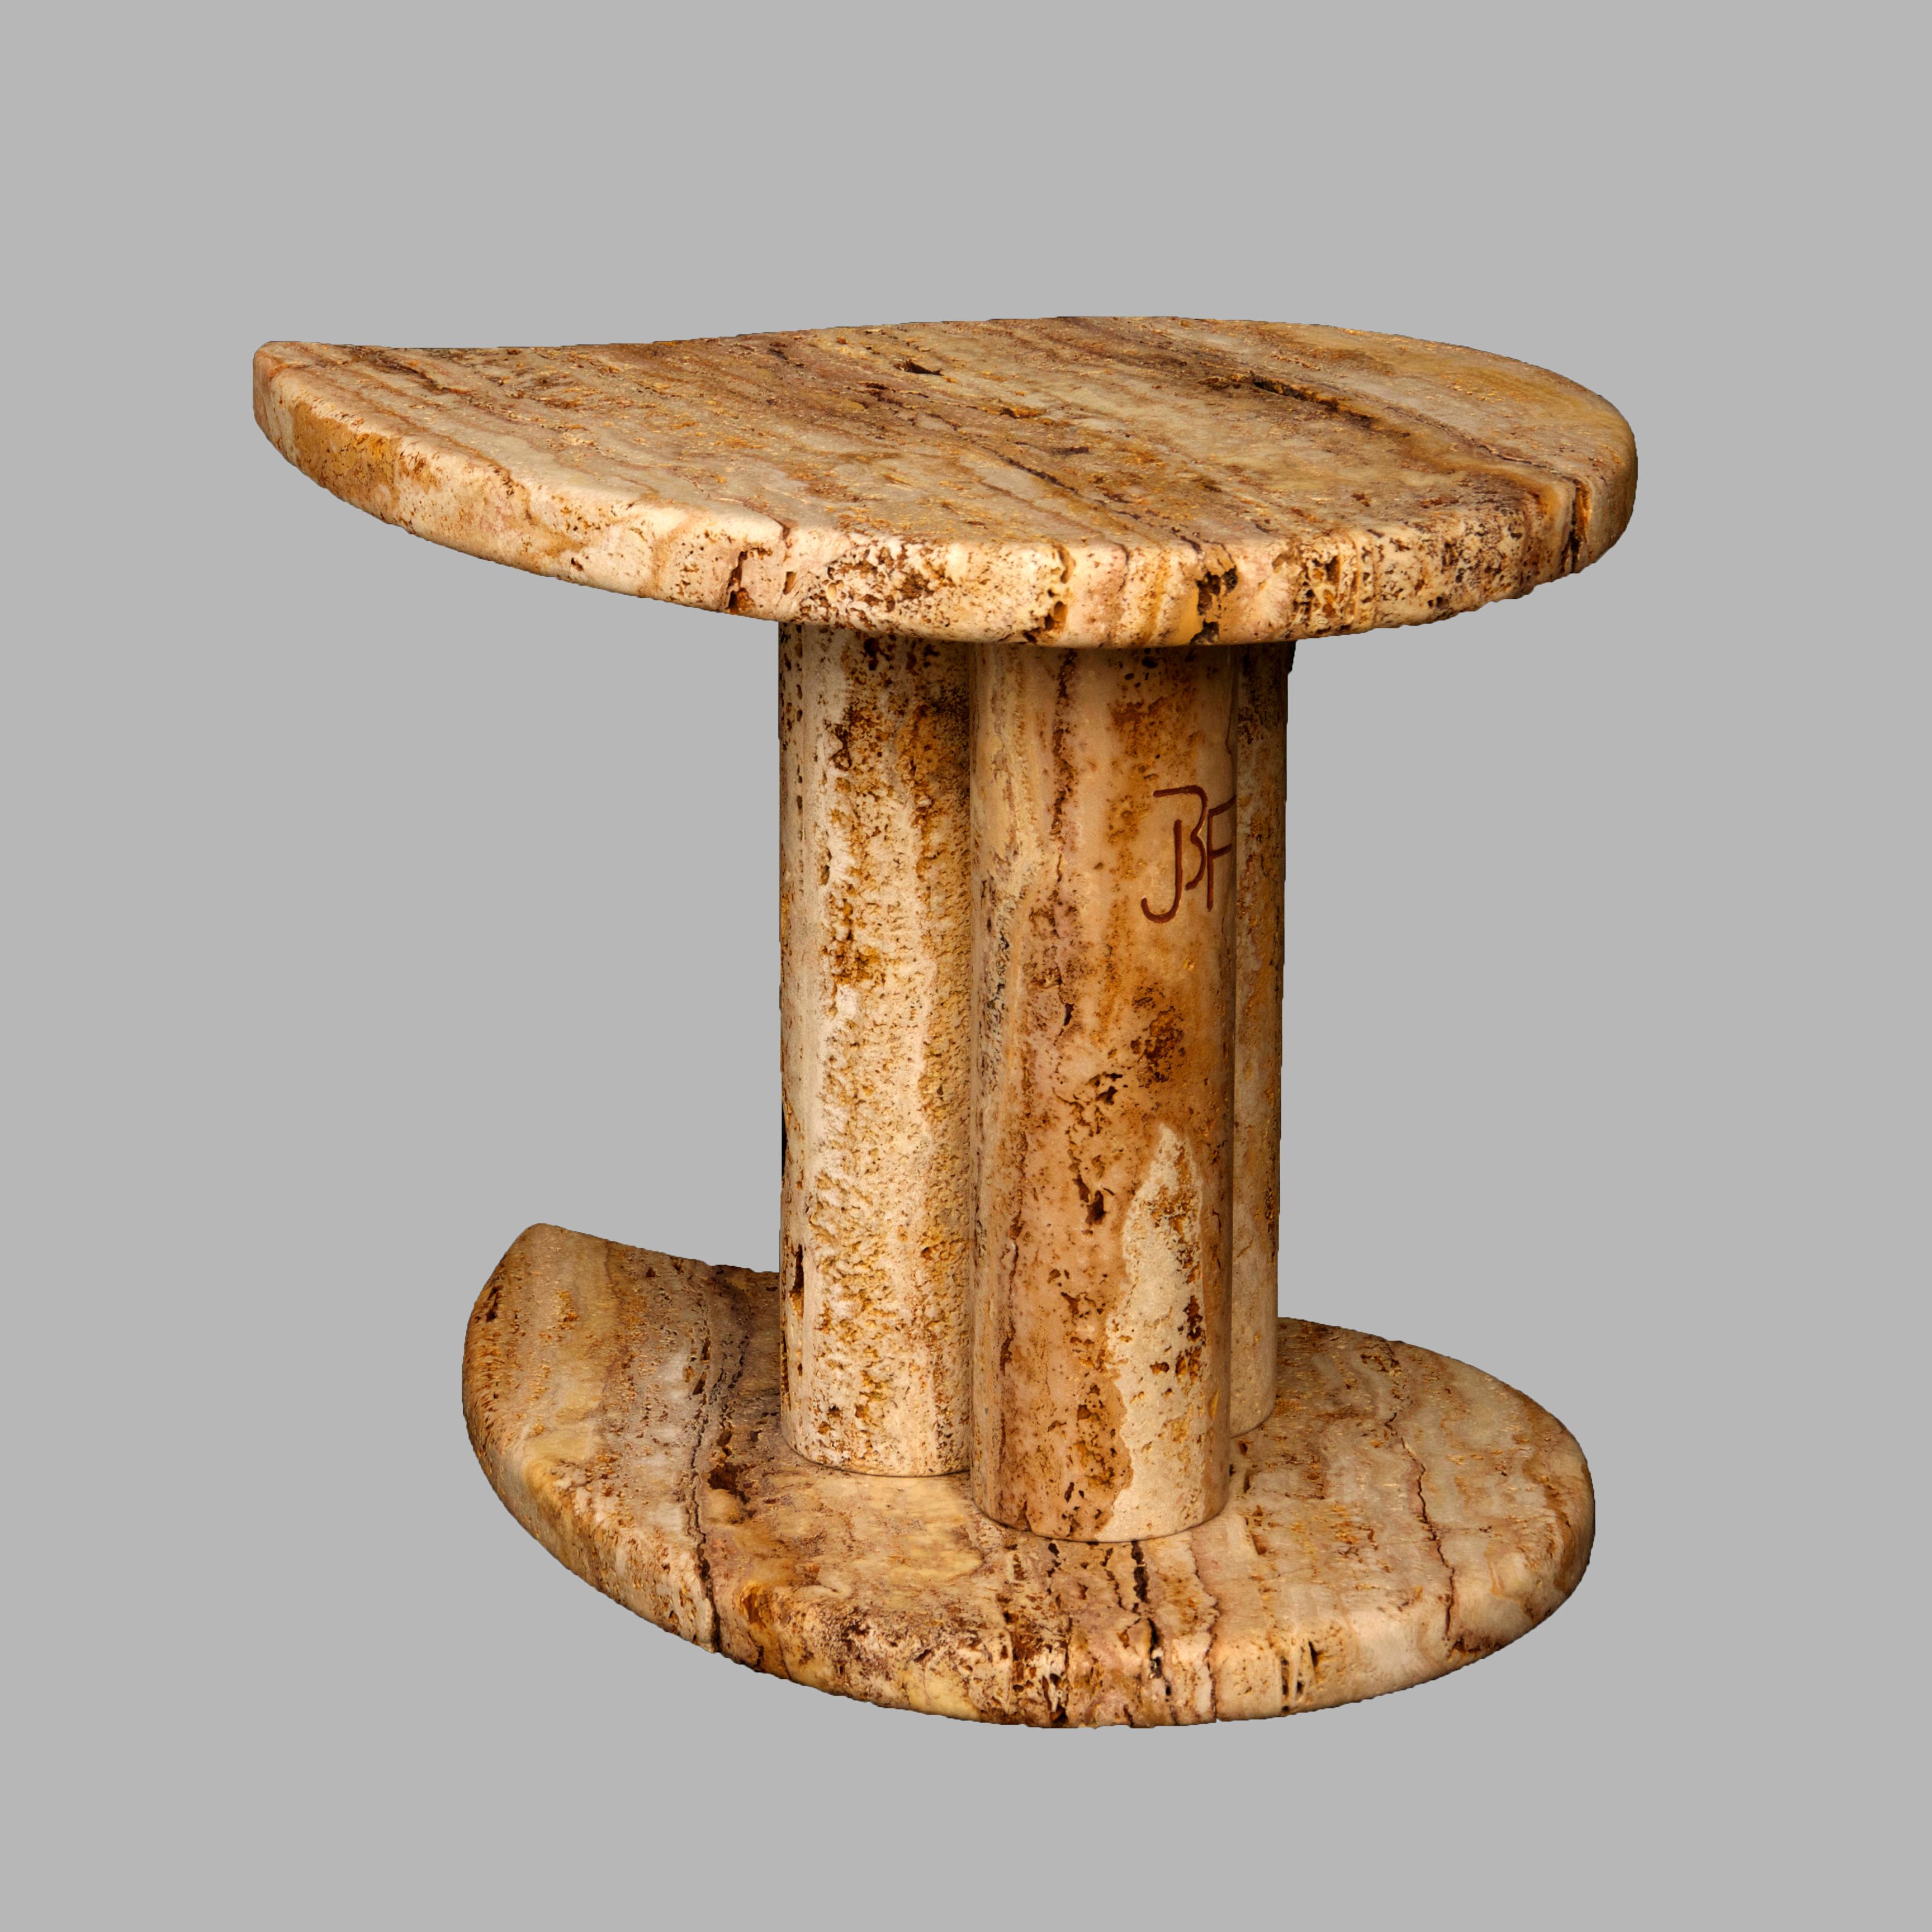 Contemporary Double Drop Side Table by Jean-Fréderic Bourdier